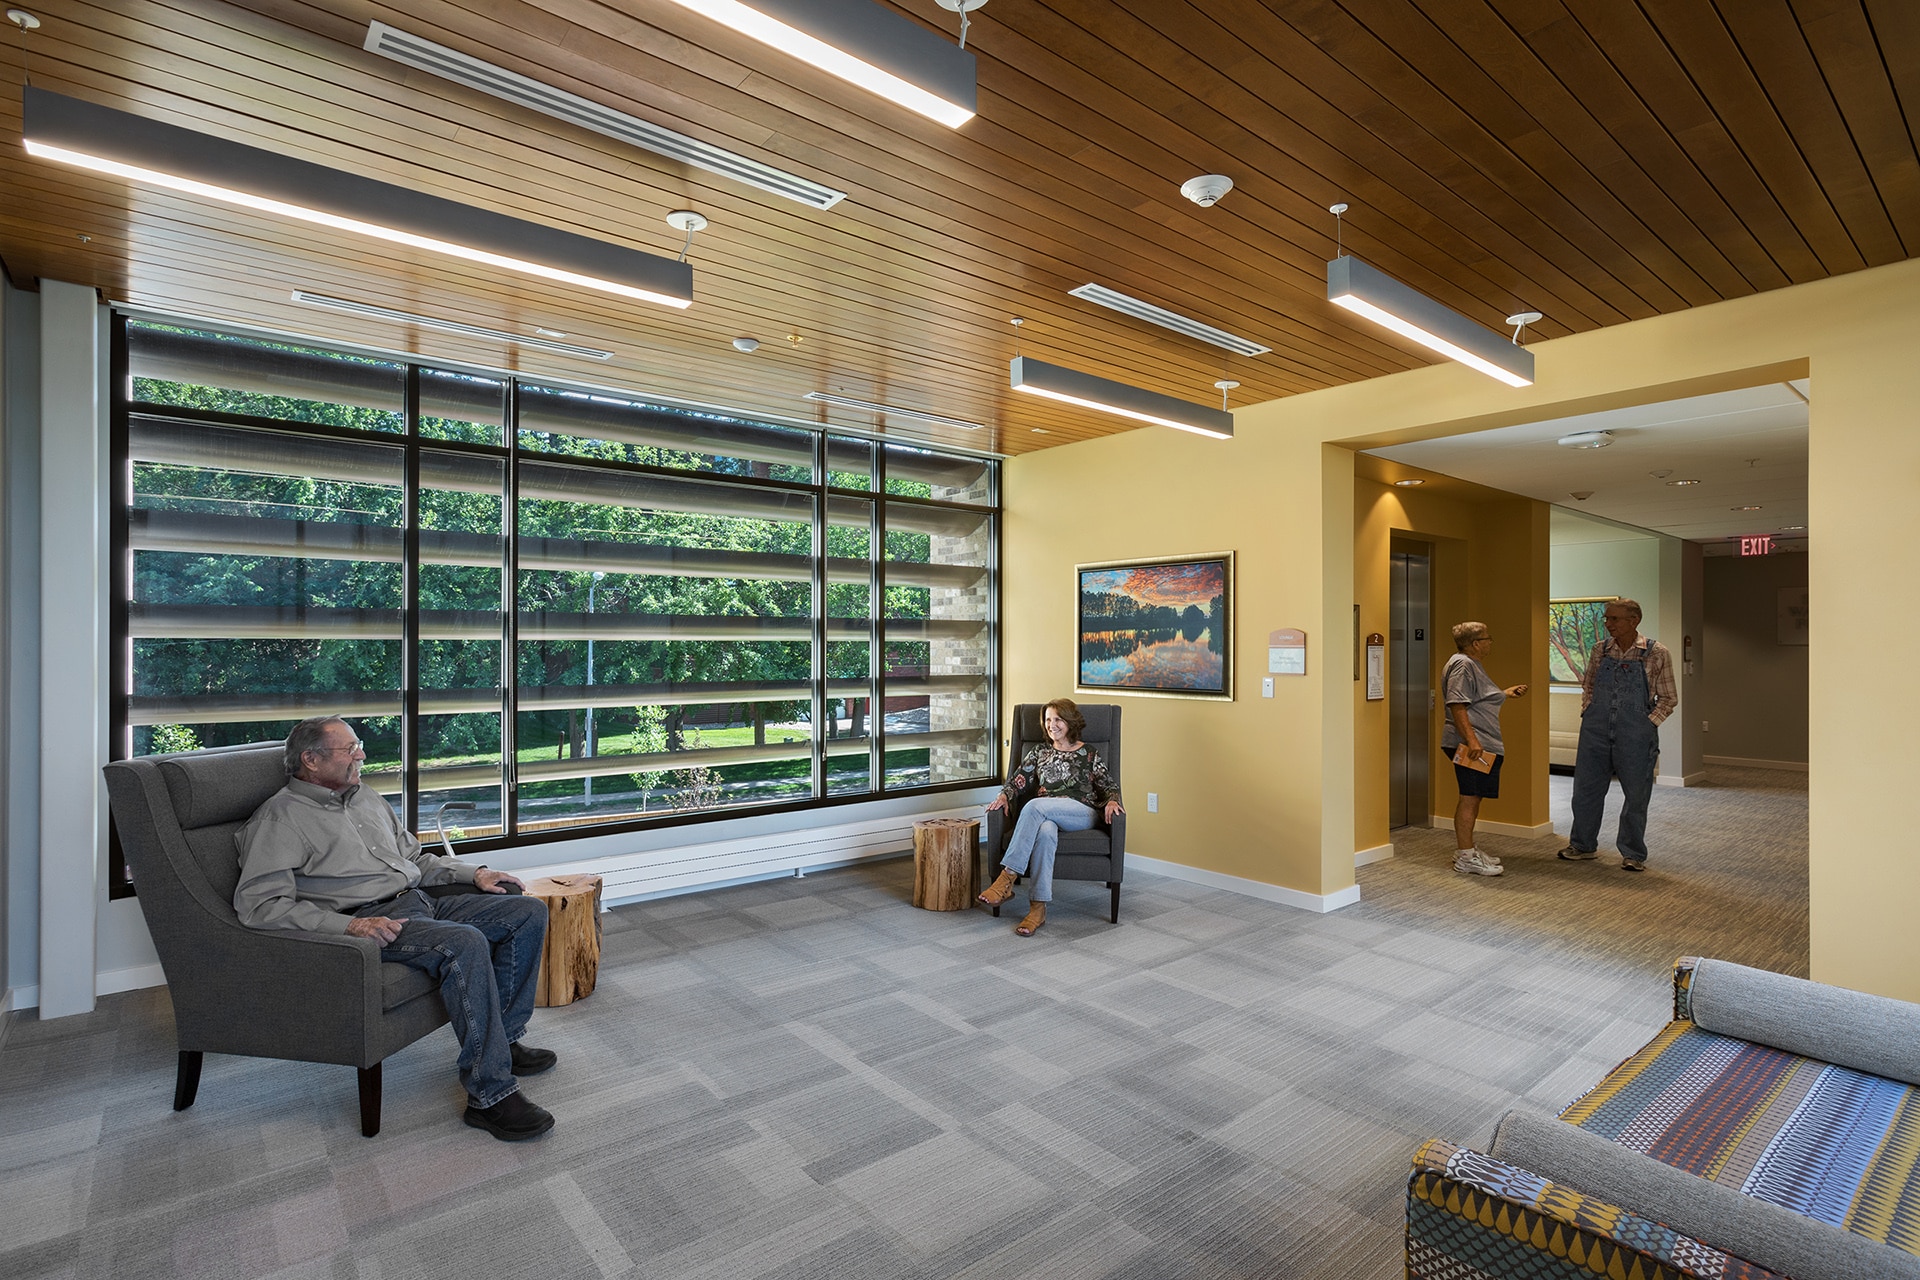 interior of american cancer society hope lodge designed by trivers architectural firm in st. louis